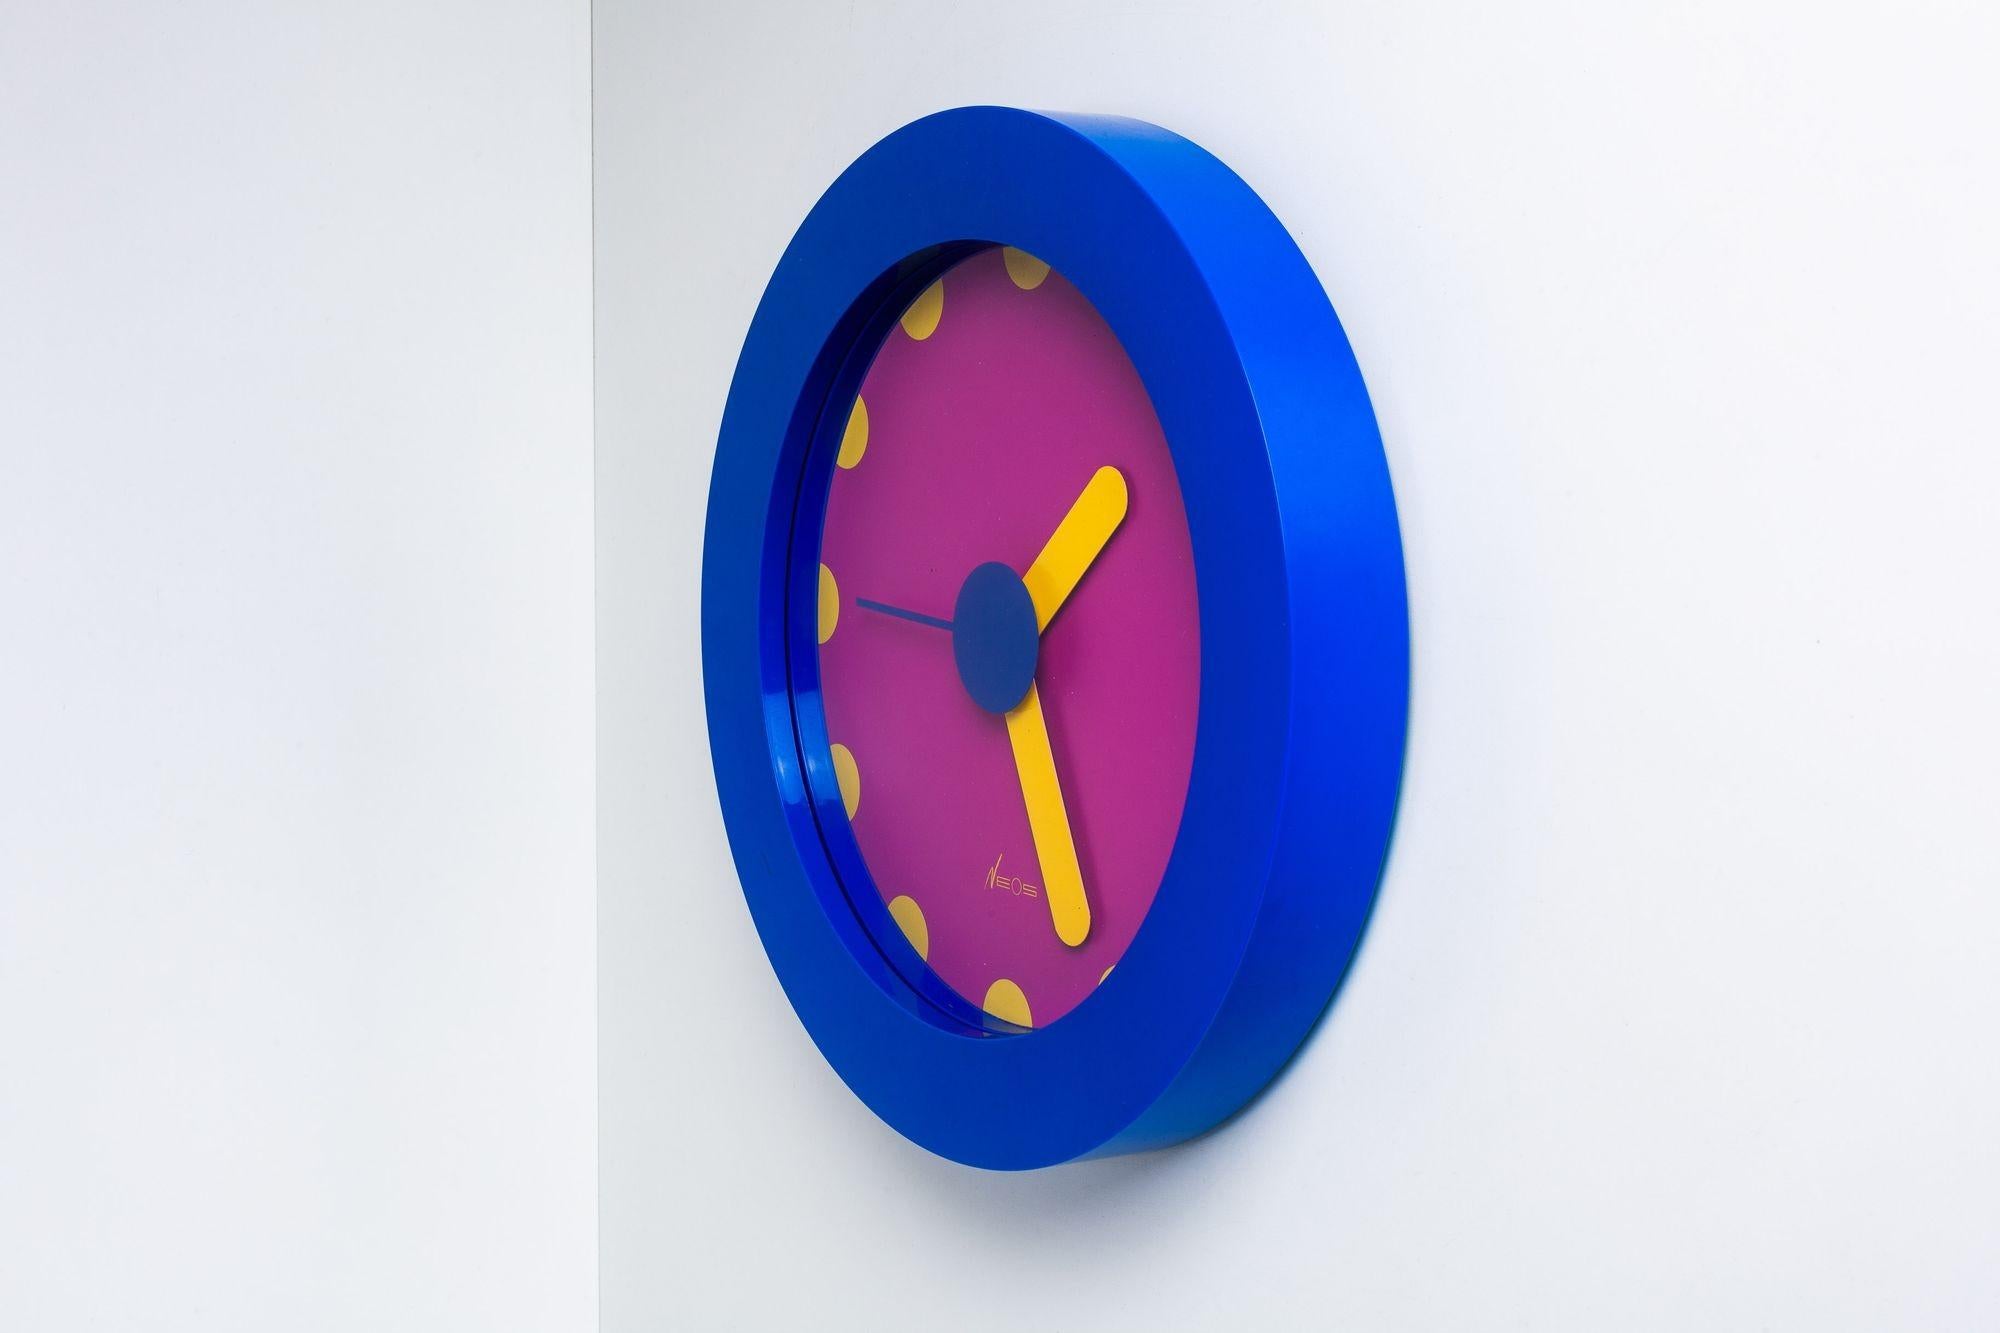 Neos Lorenz du Pasquier & Sowden Postmodern Clock
A blue and purple plastic postmodern wall clock with yellow hands and numbers designed by Nathalie du Pasquier and George Sowden for Neos of Lorenz in the late 1980s.
Co-founders of the Memphis